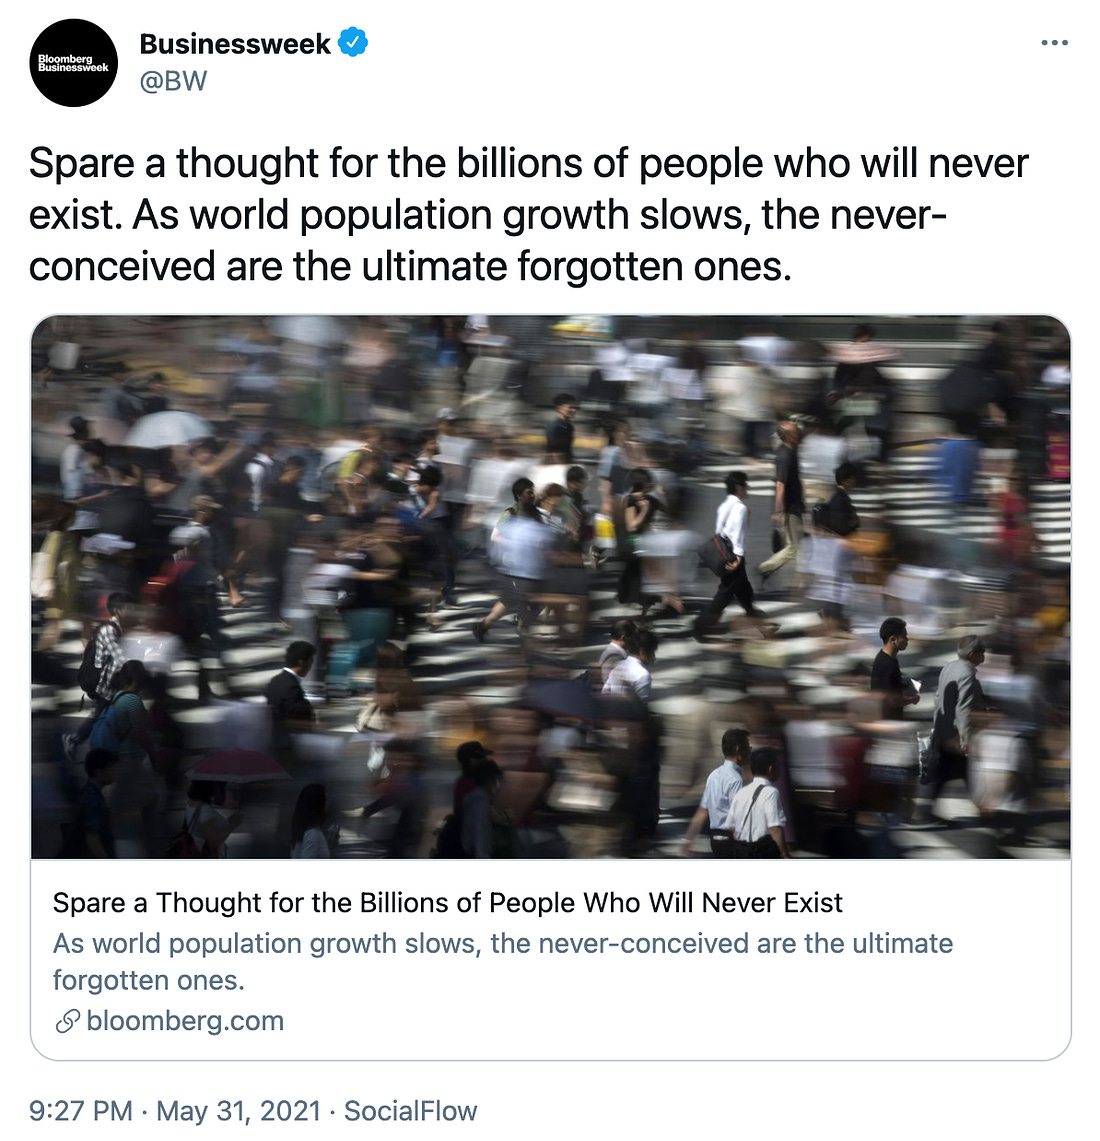 Tweet from Bloomberg Businessweek reading "Spare a thought for the billions of people who will never exist. As world population growth slows, the never-conceived are the ultimate forgotten ones."